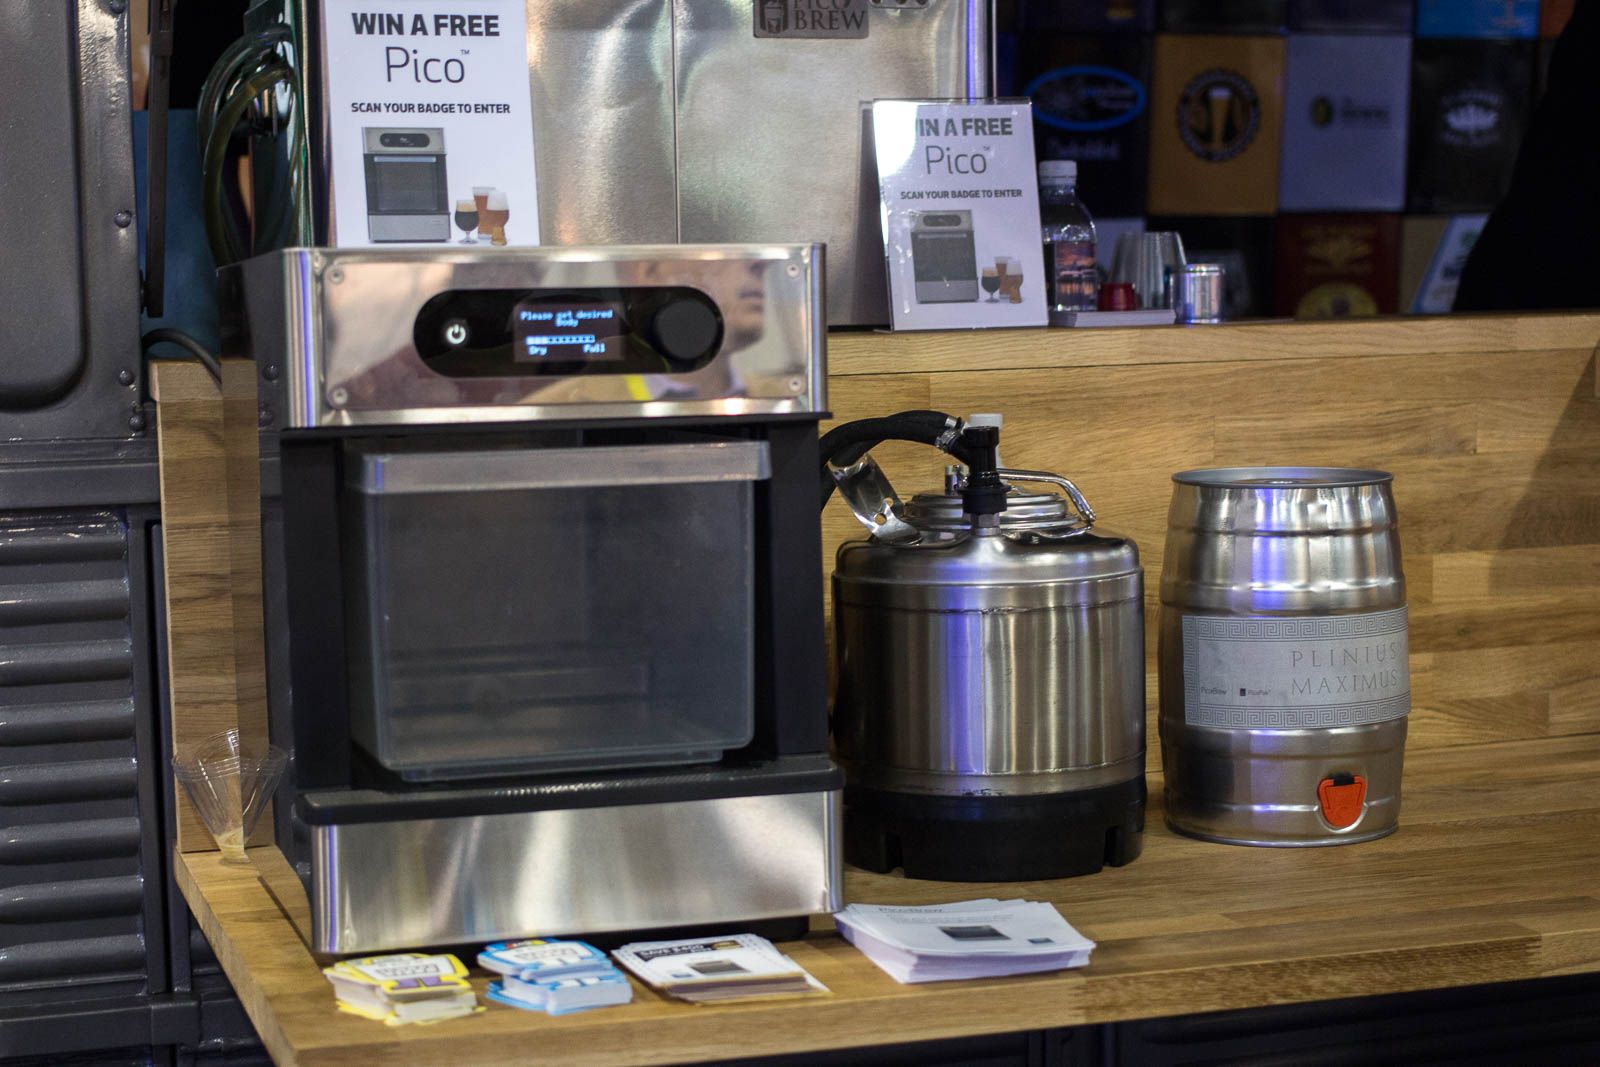 pico brew a home brewing machine that makes beer making as easy as baking a loaf of bread image 1